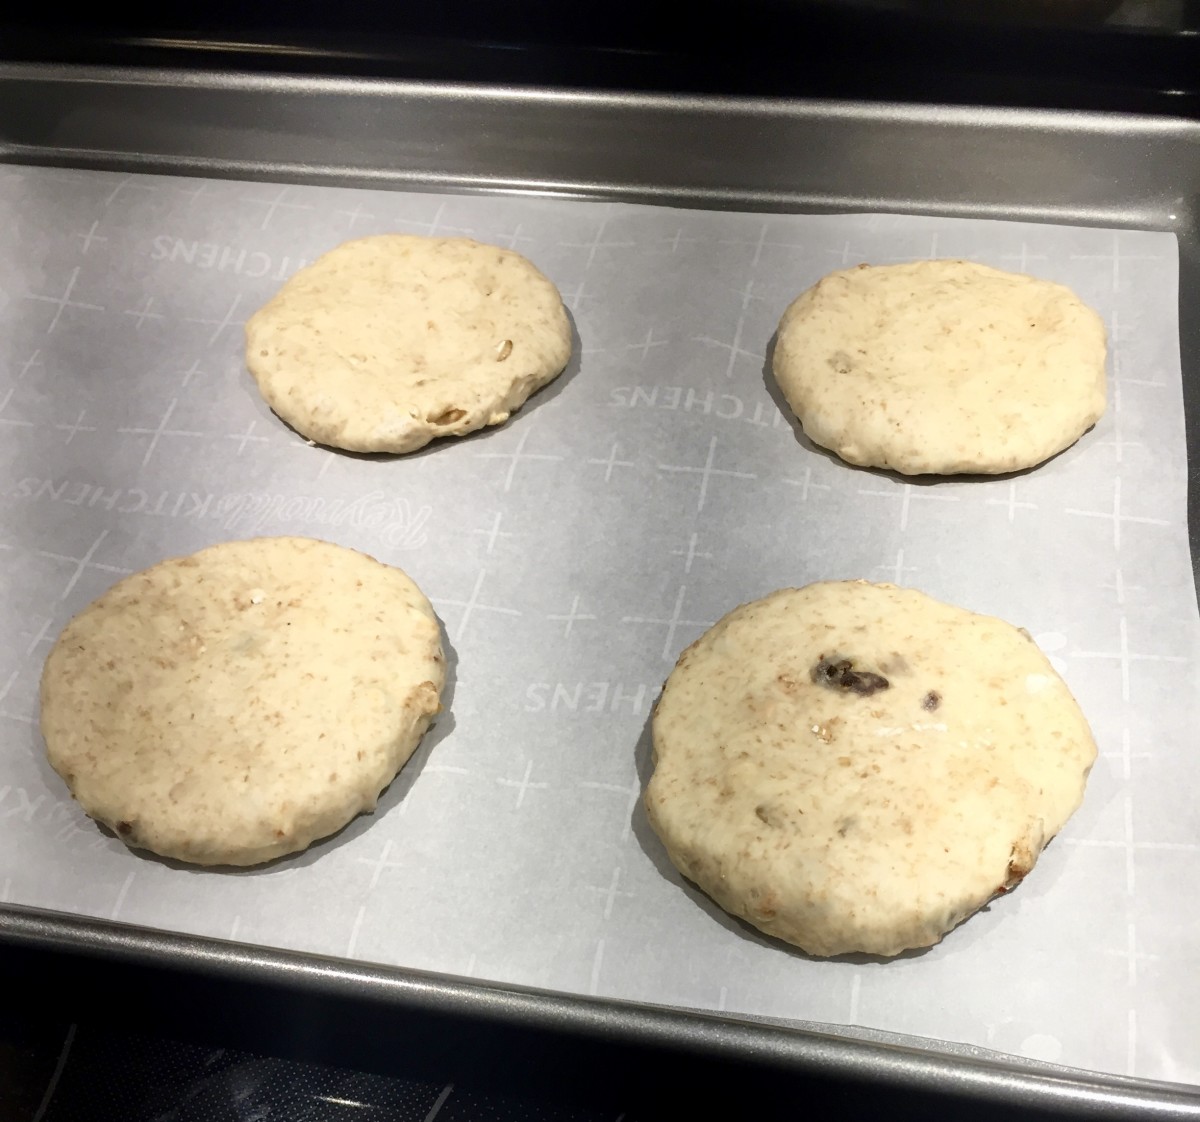 Place discs on prepared pans, cover, and allow to rise for 20 minutes before baking.